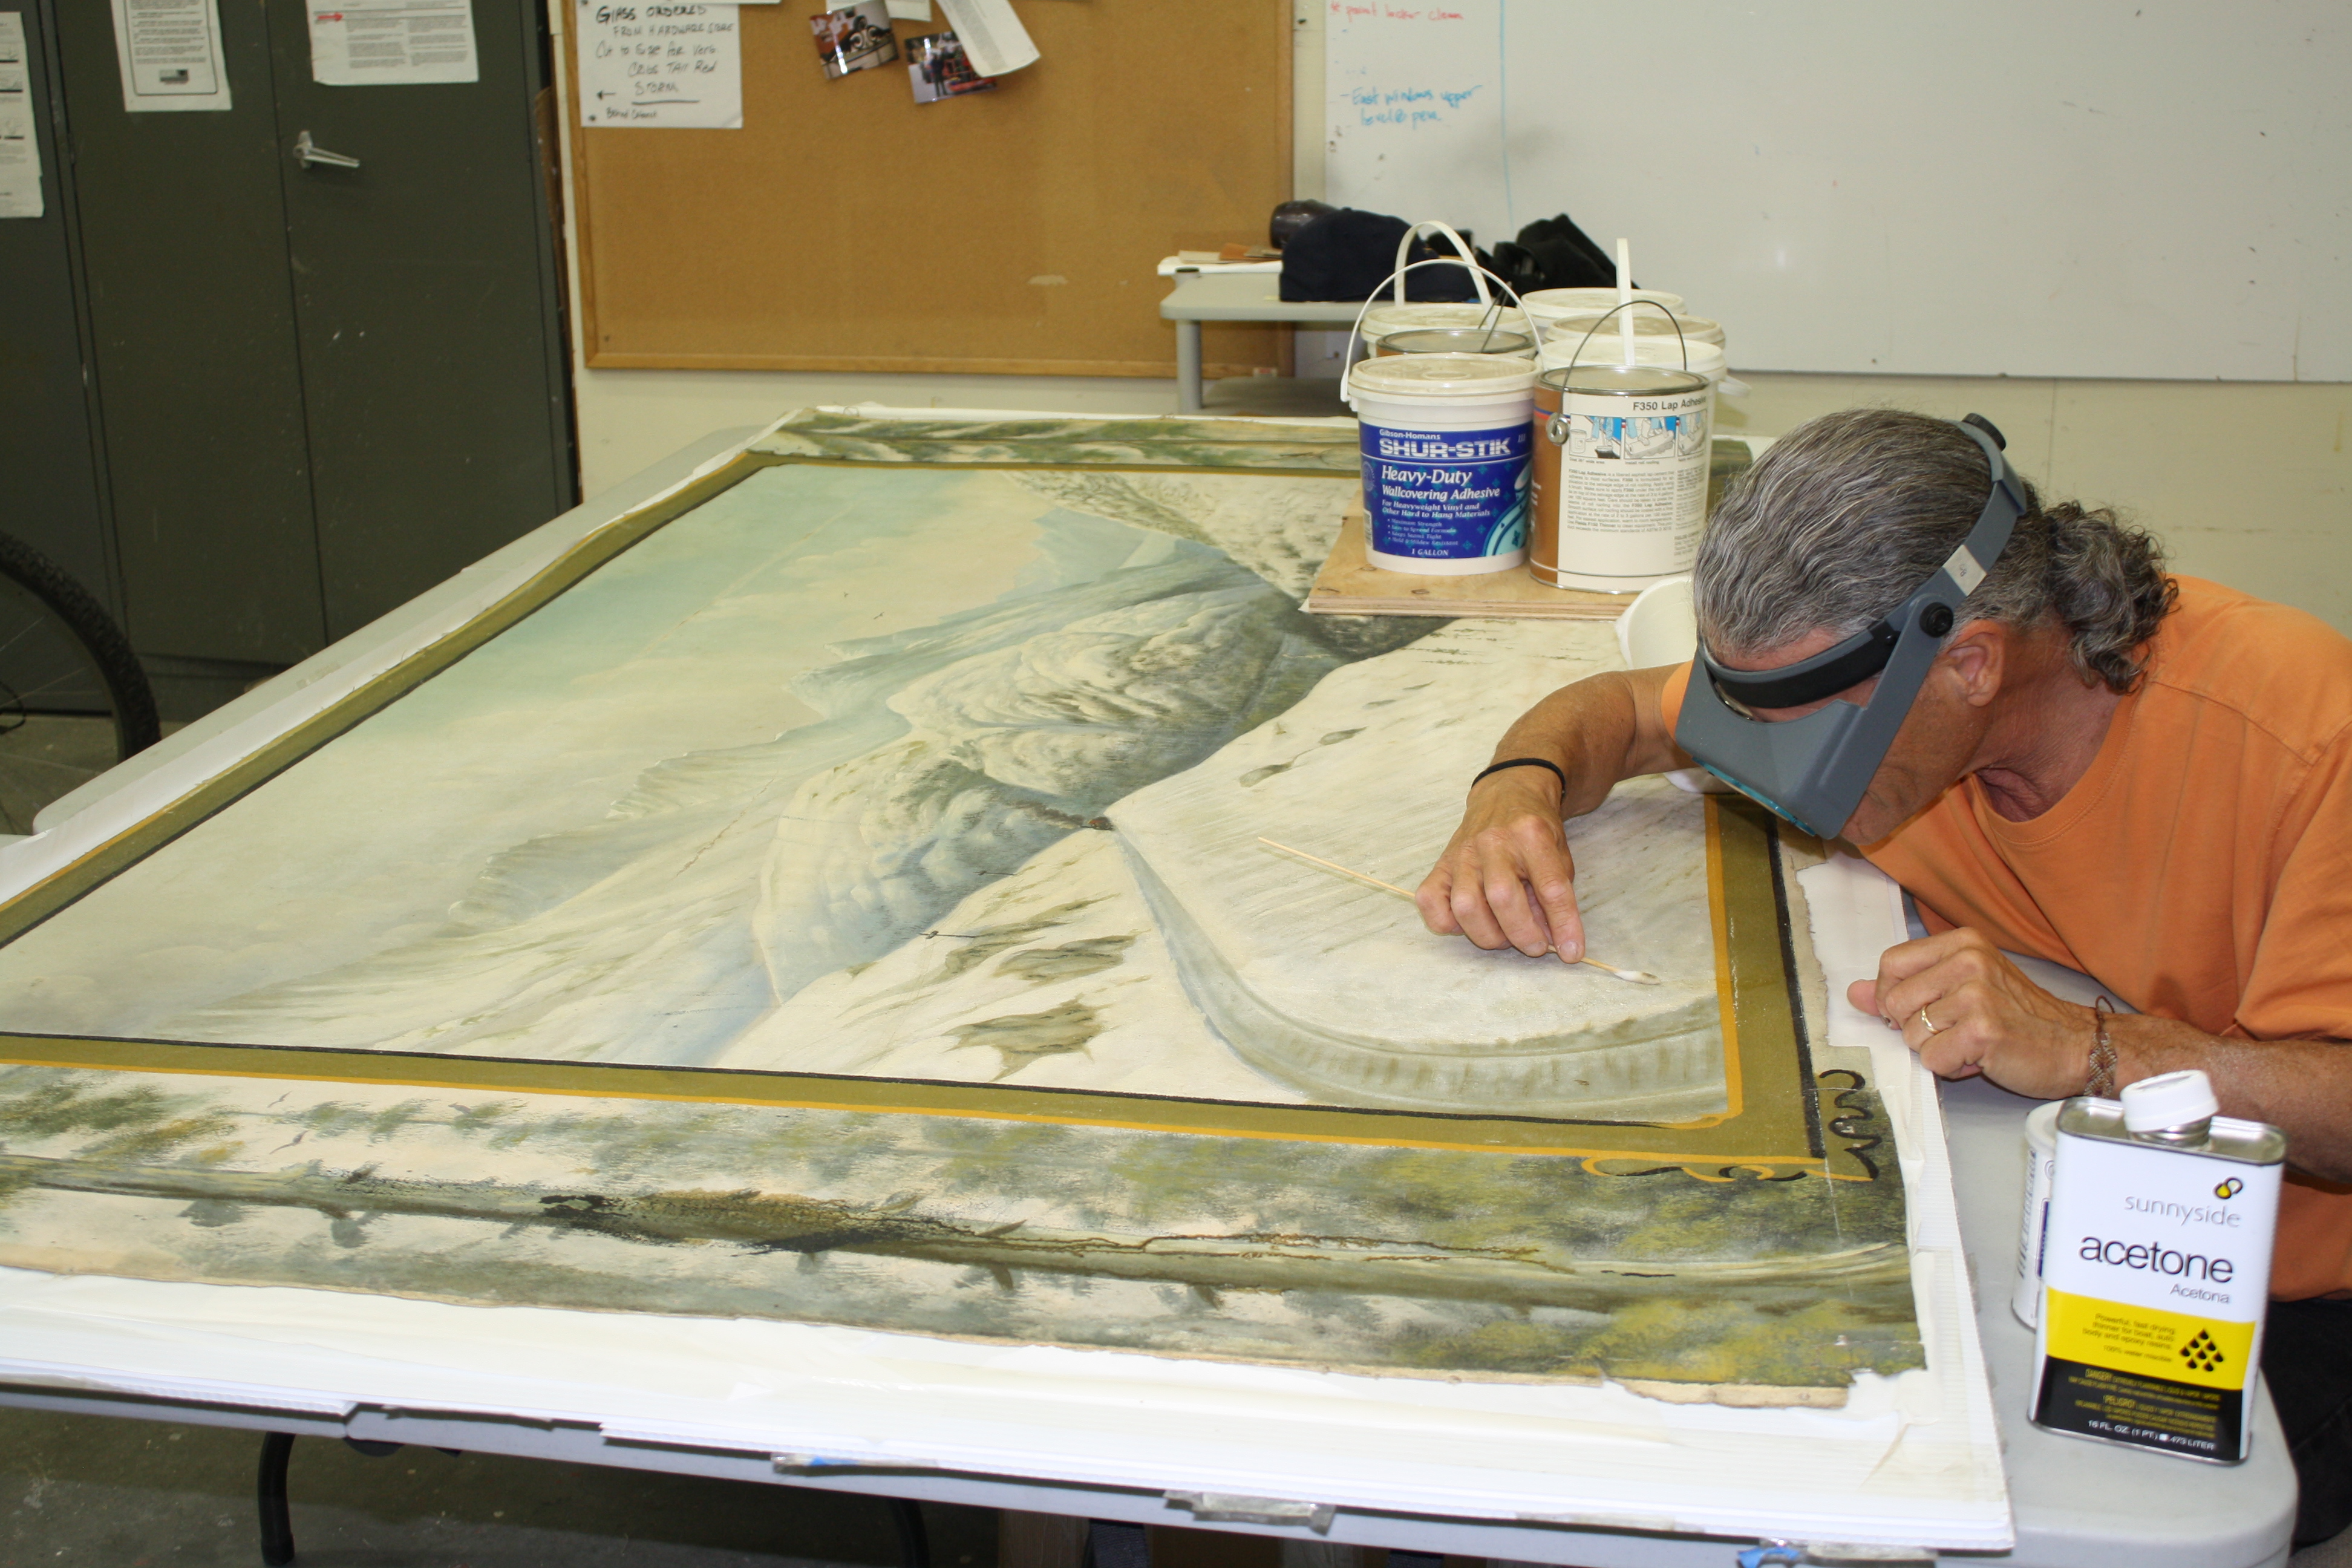 A man works on a painting with cleaning tools.